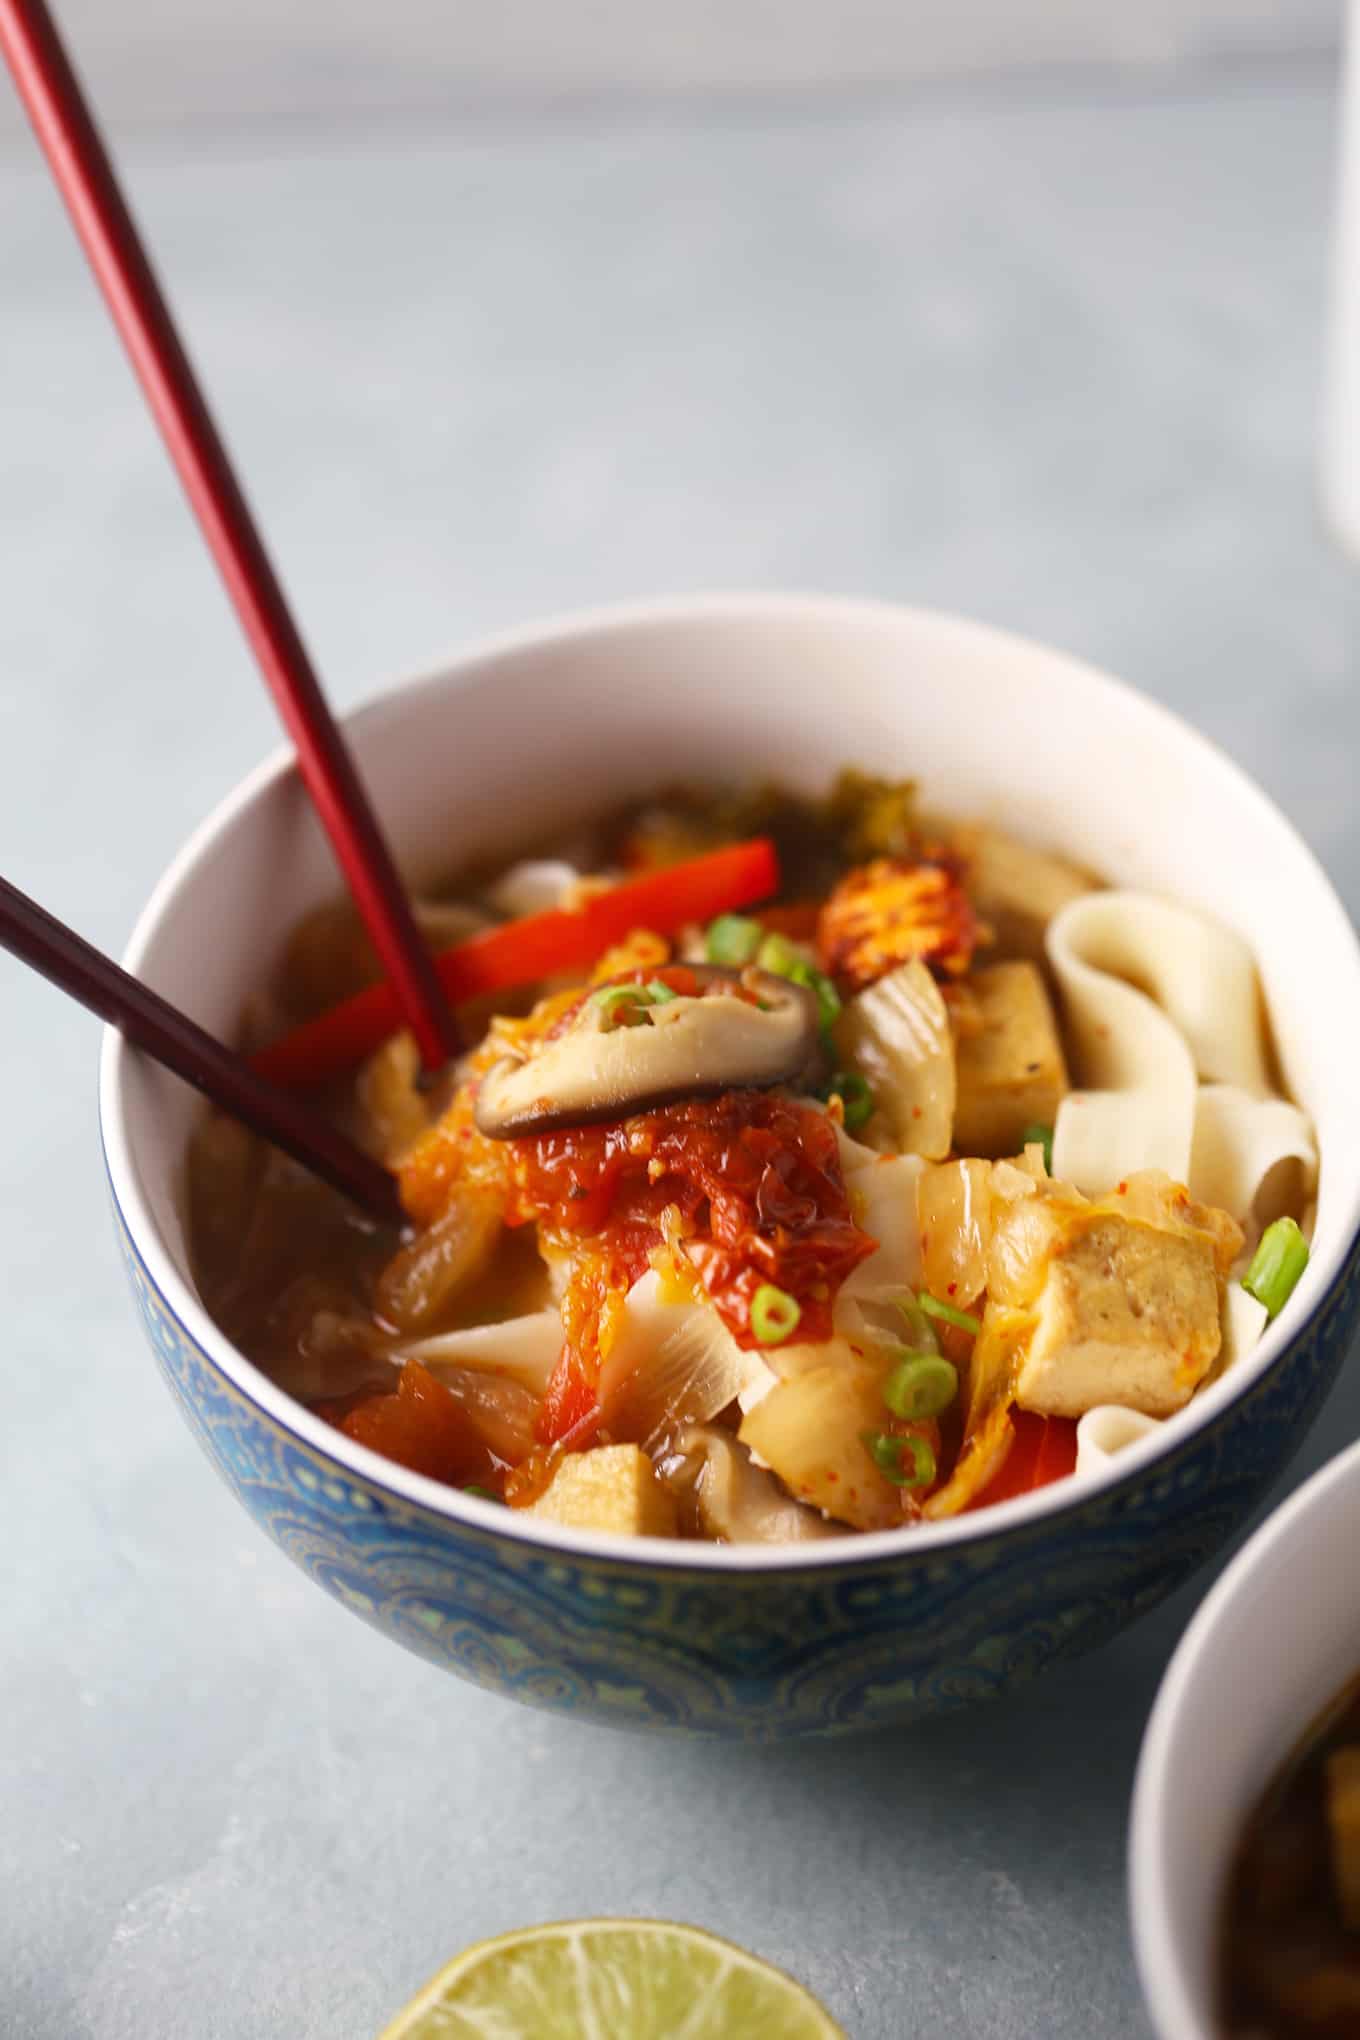 A bowl of Japanese Udon Noodles with tofu and a kimchi miso broth, with chopsticks.